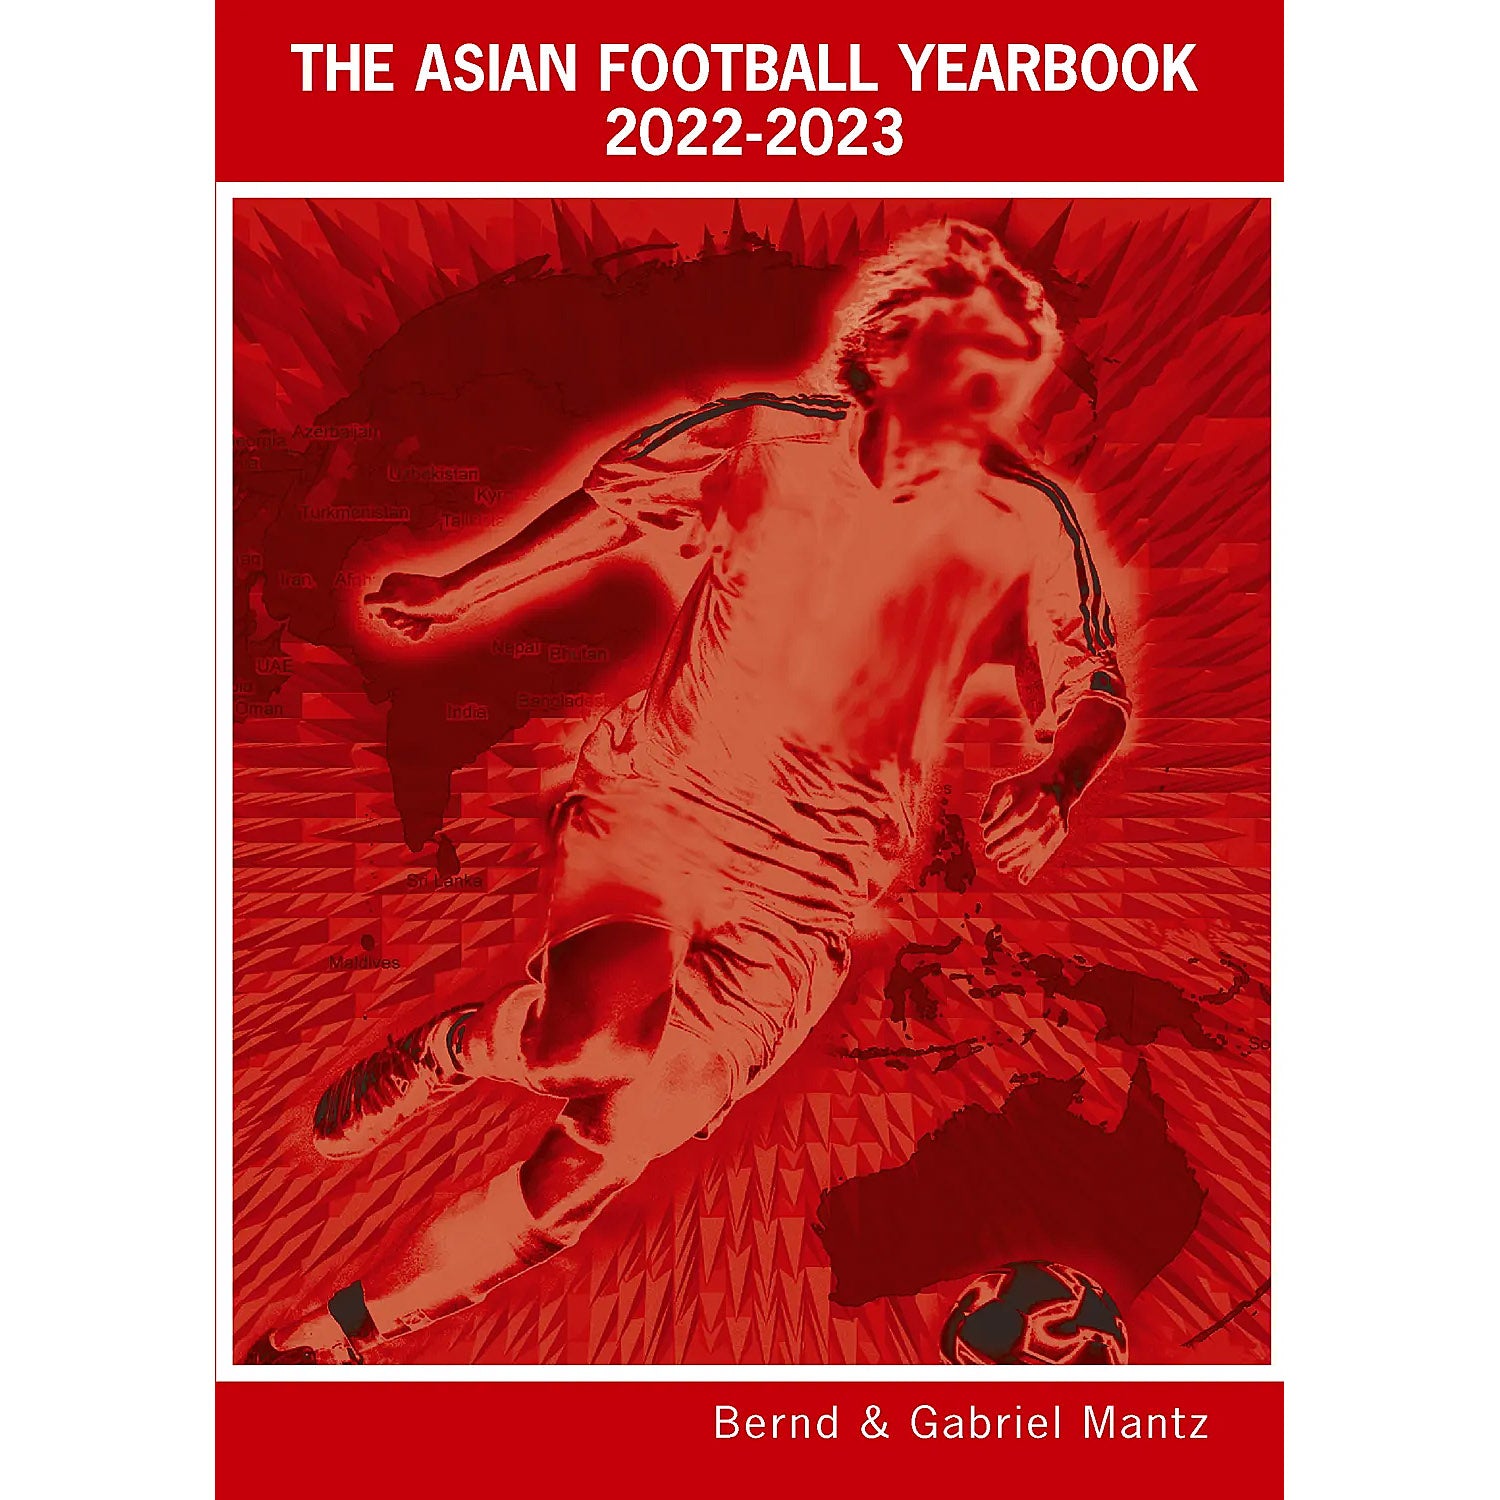 The Asian Football Yearbook 2022-2023